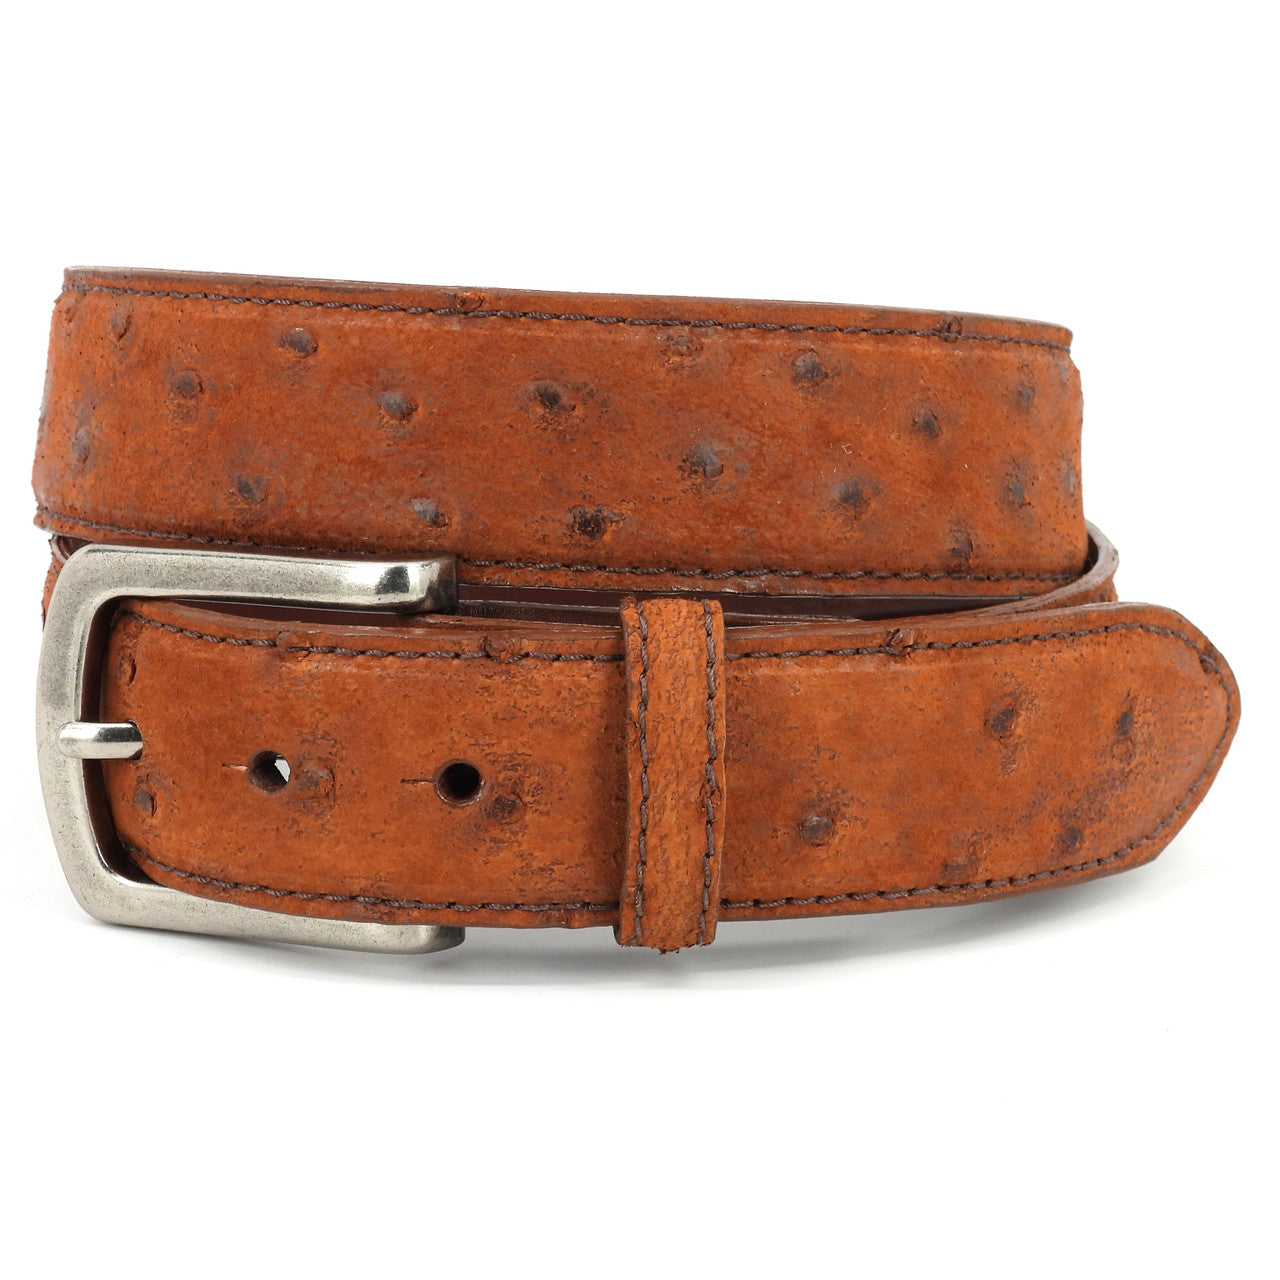 Genuine South African Ostrich Skin Belt in Antique Brandy by Torino Leather